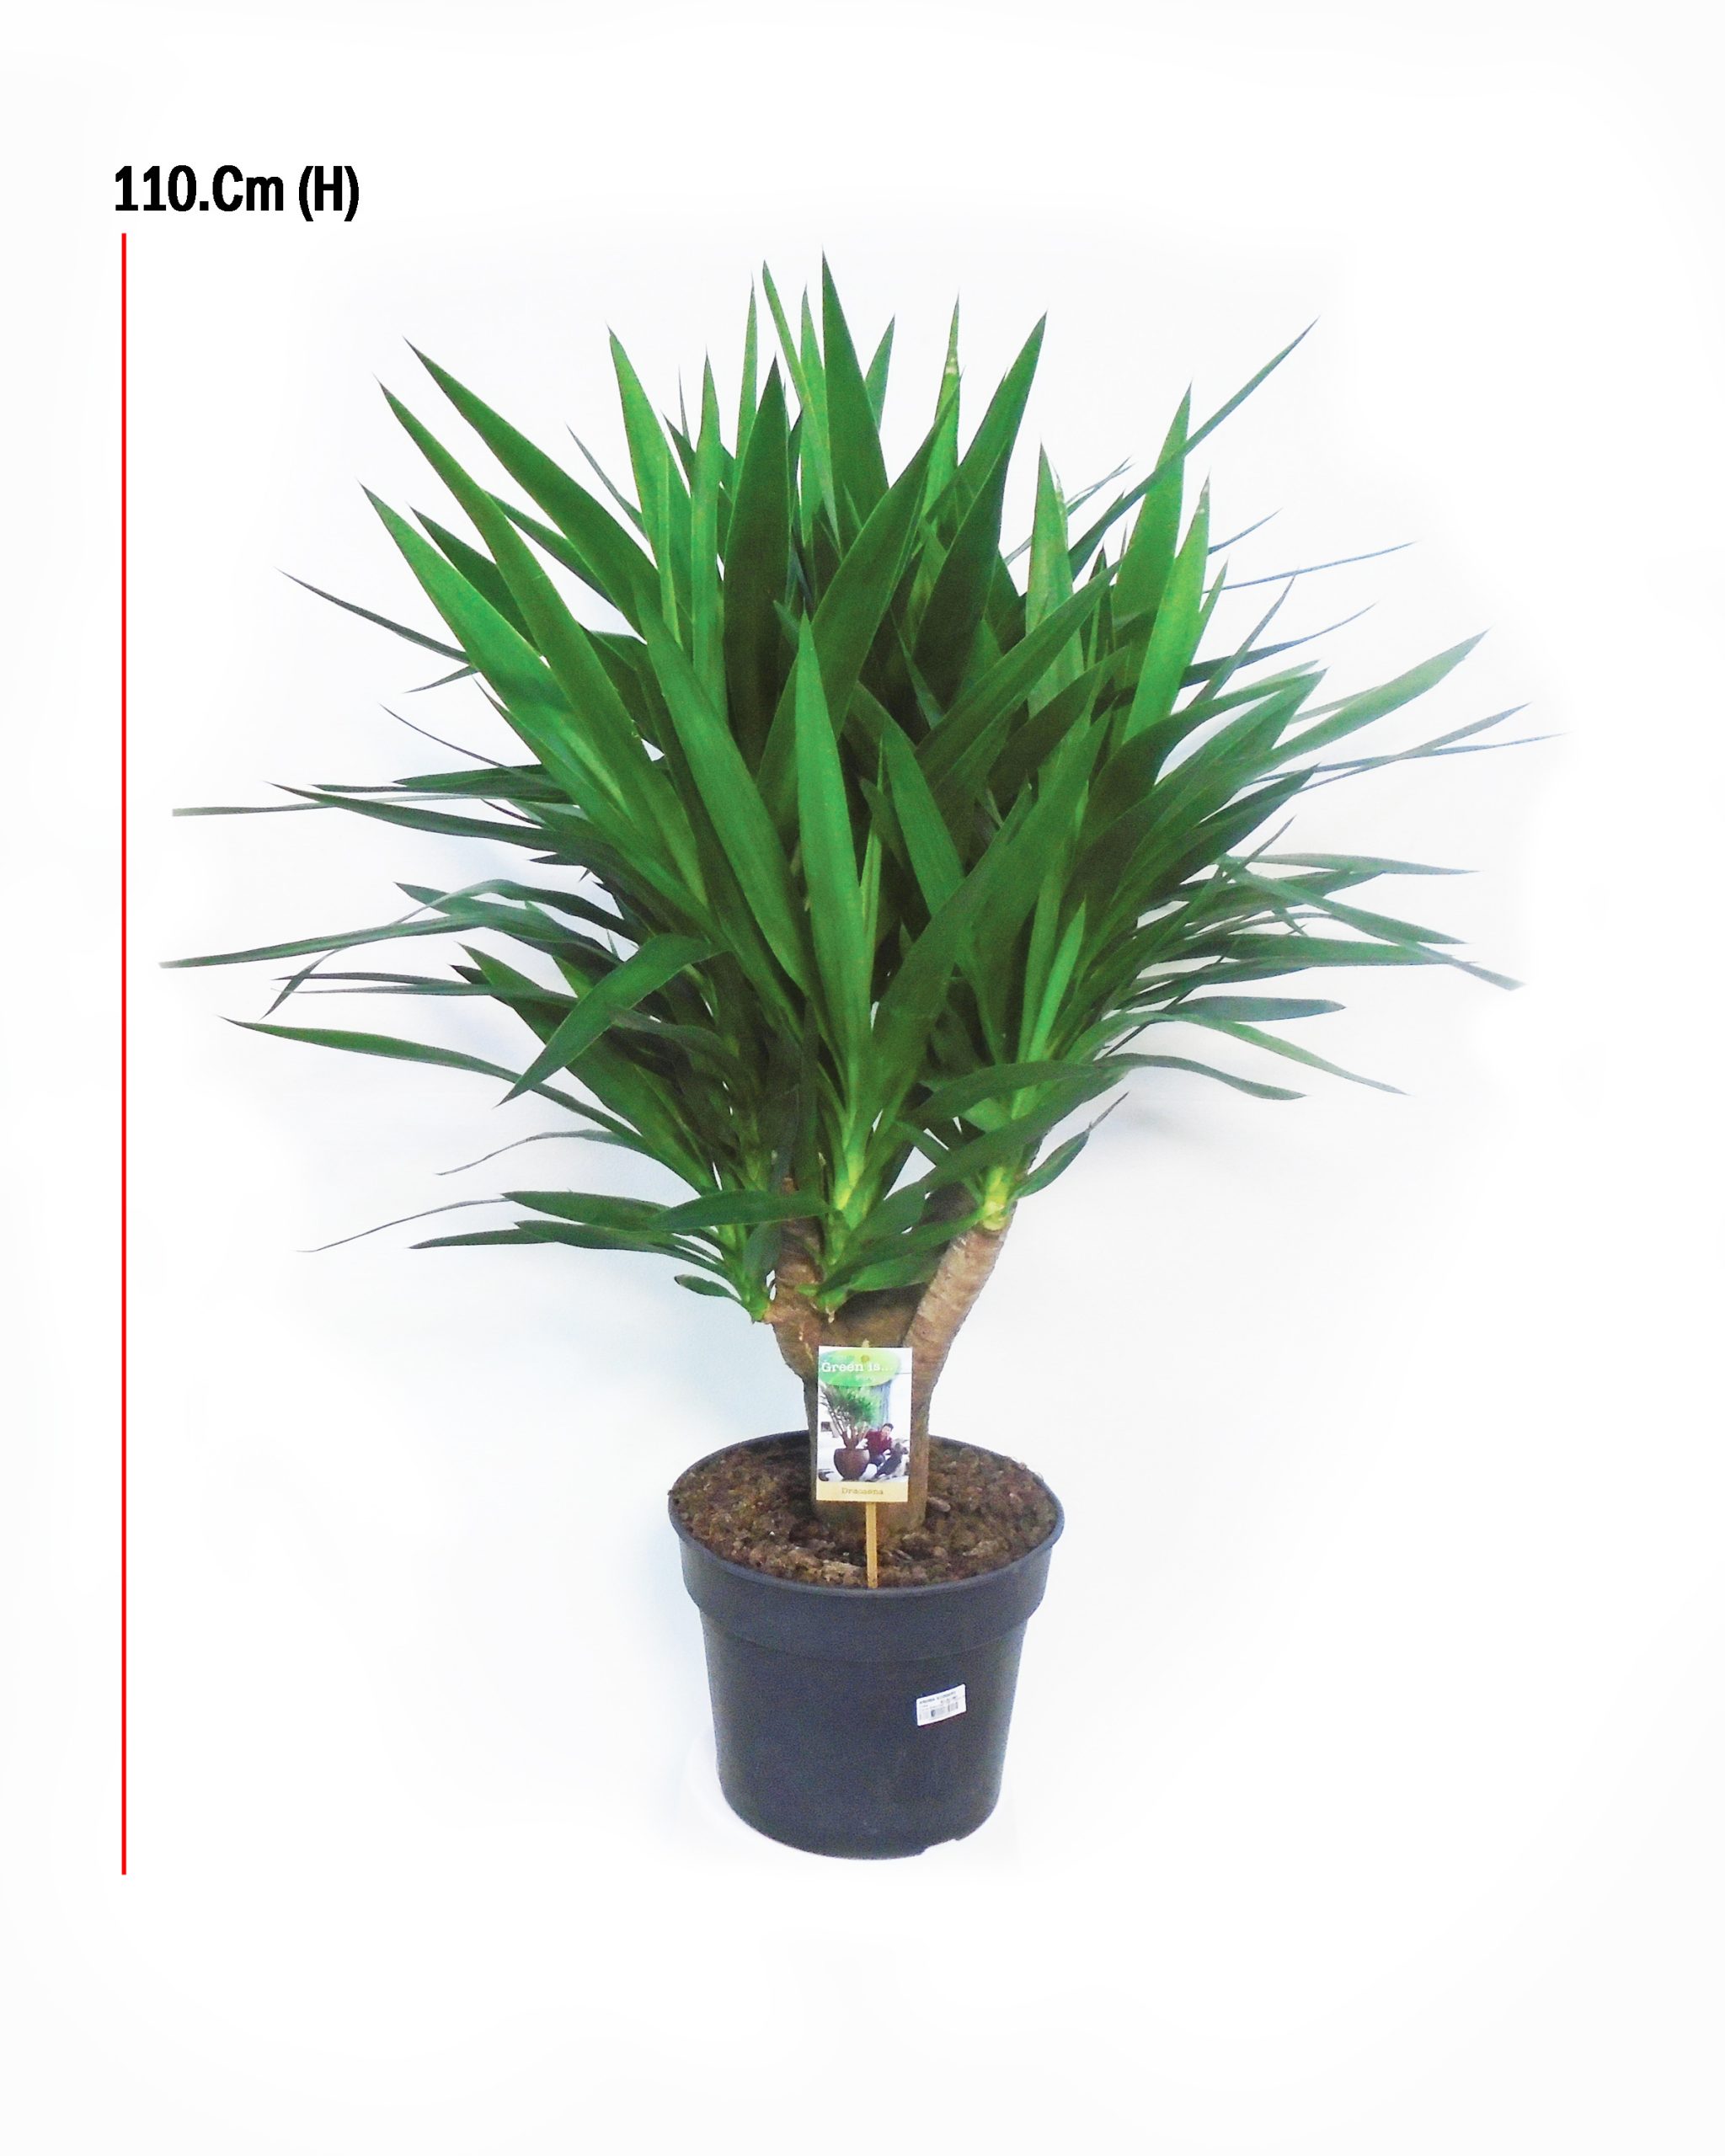 Yucca Branched Stump, Height: 110Cm, Pot Size: 30Cm